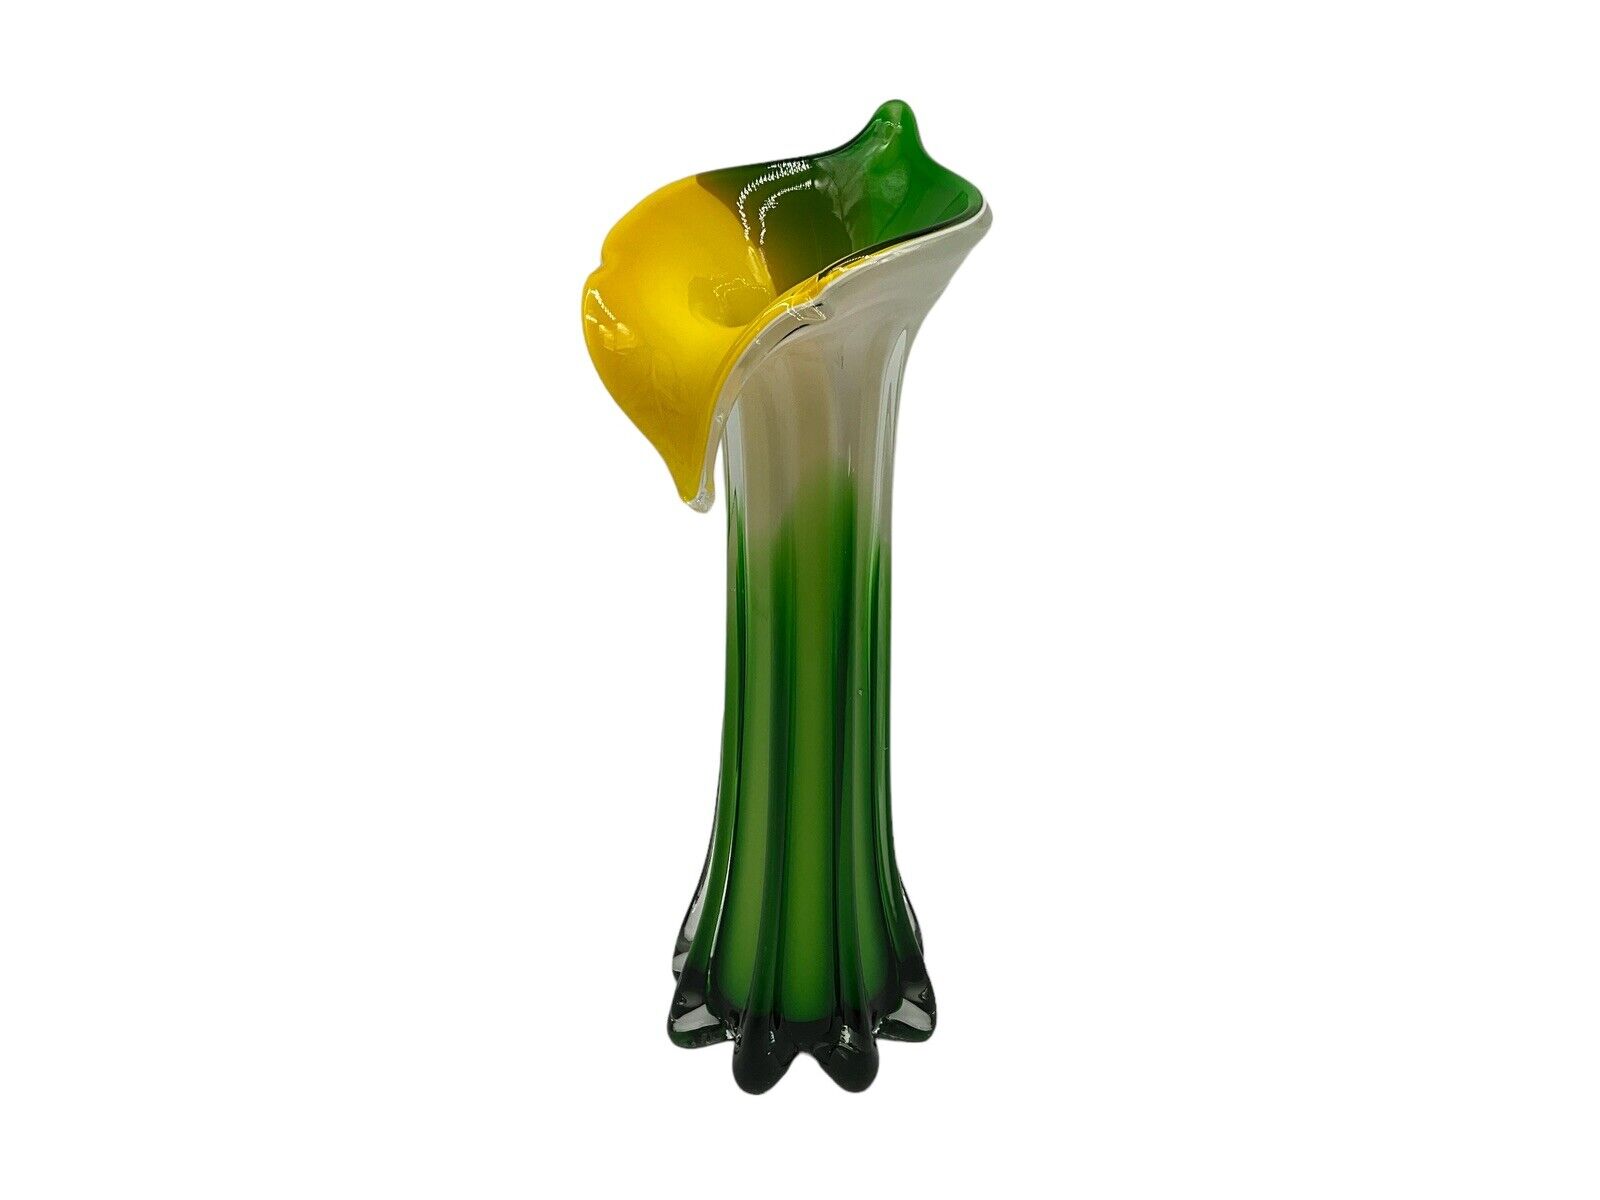 Jack In The Pulpit Calla Lily Vase 11.5 Inches Tall By Pier 1 Imports Vintage